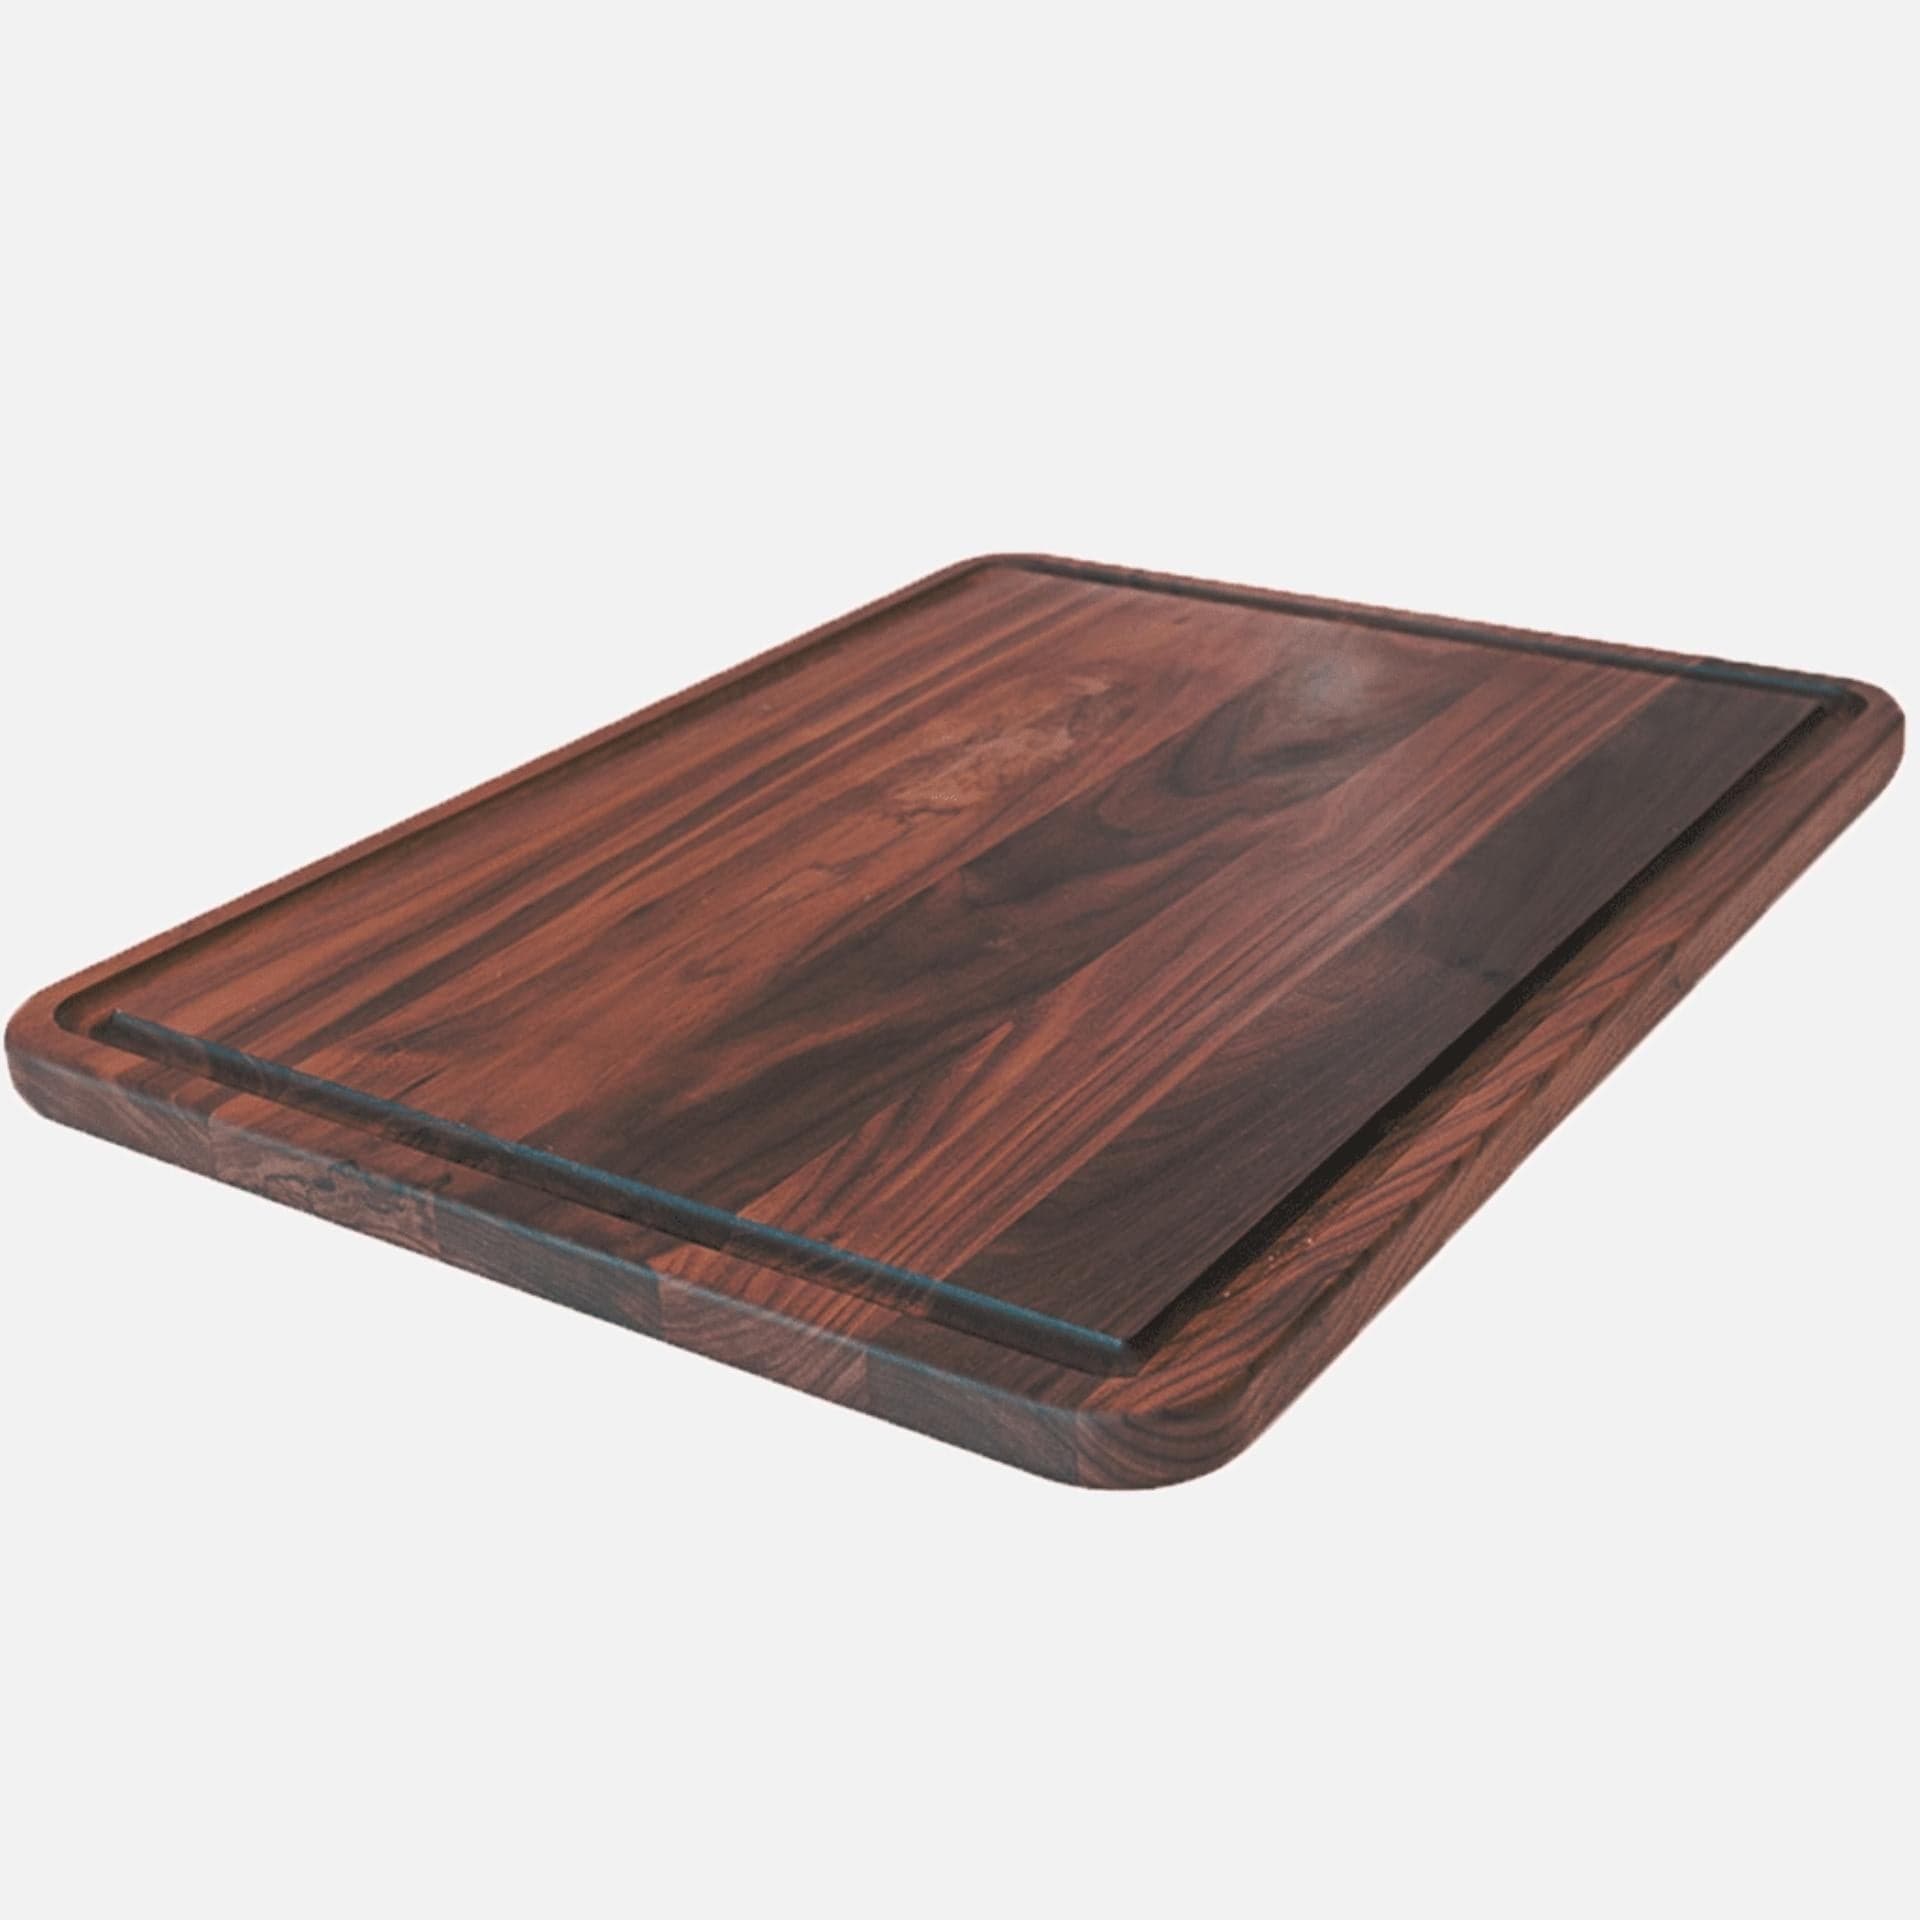 https://yumcrunch.com/cdn/shop/products/virginia-boys-kitchens-18x24-in-extra-large-walnut-cutting-board-with-juice-drip-groove-made-in-usa-extra-large-18-x-24-walnut-board-reversible-with-juice-groove-cutting-board-made-in_05f3fd07-b4e7-4713-9041-c7b0a6c63413.jpg?v=1689277412&width=1946